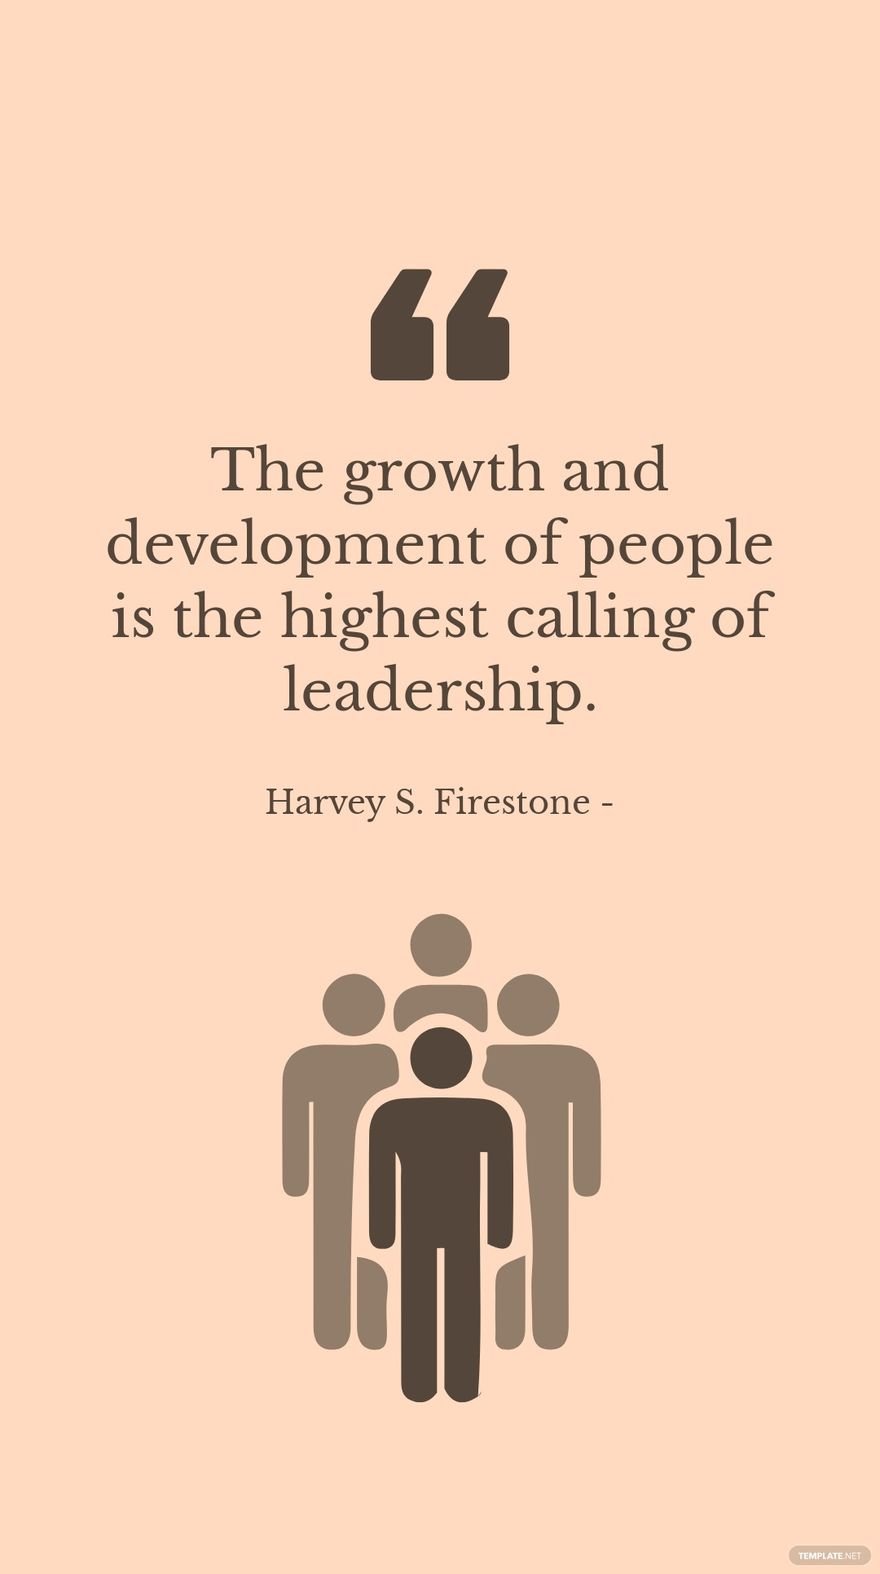 Free Harvey S. Firestone - The growth and development of people is the highest calling of leadership.